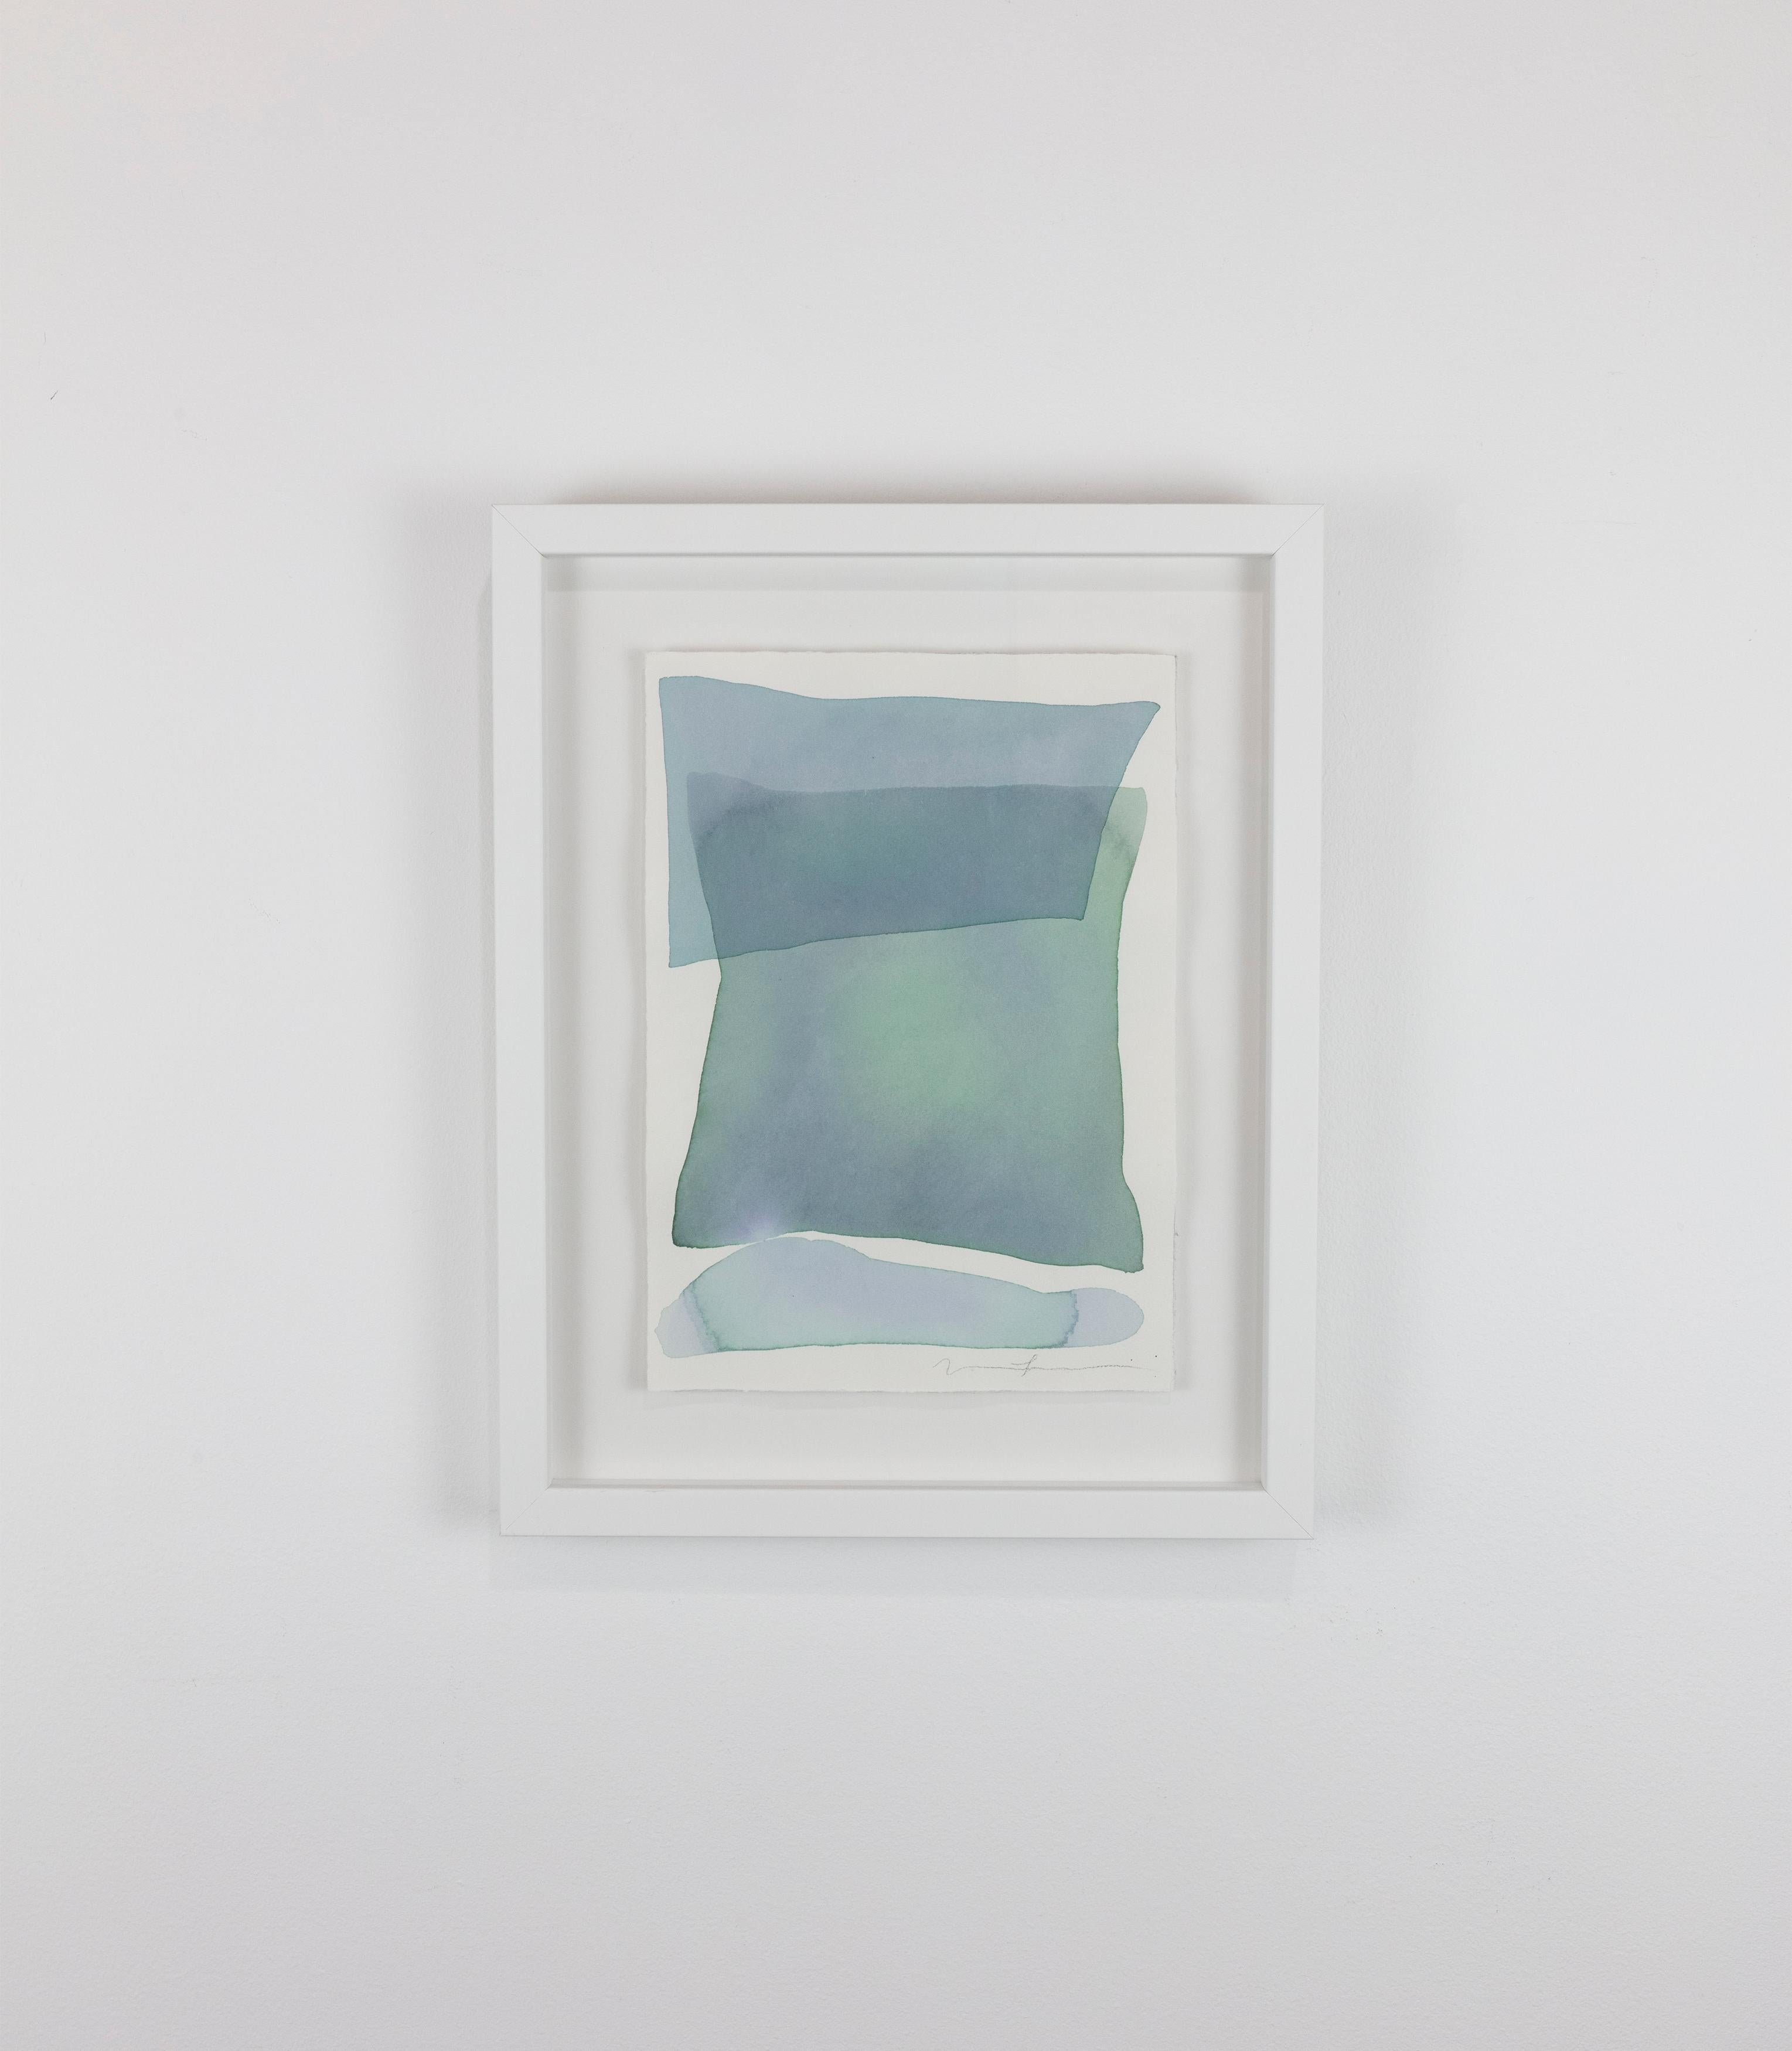 This original abstract watercolor painting by Nealy Hauschildt features a light blue and green palette, with organic planes of washy color applied in layers to create an abstract, organic, and balanced composition. The painting on paper is 10.25